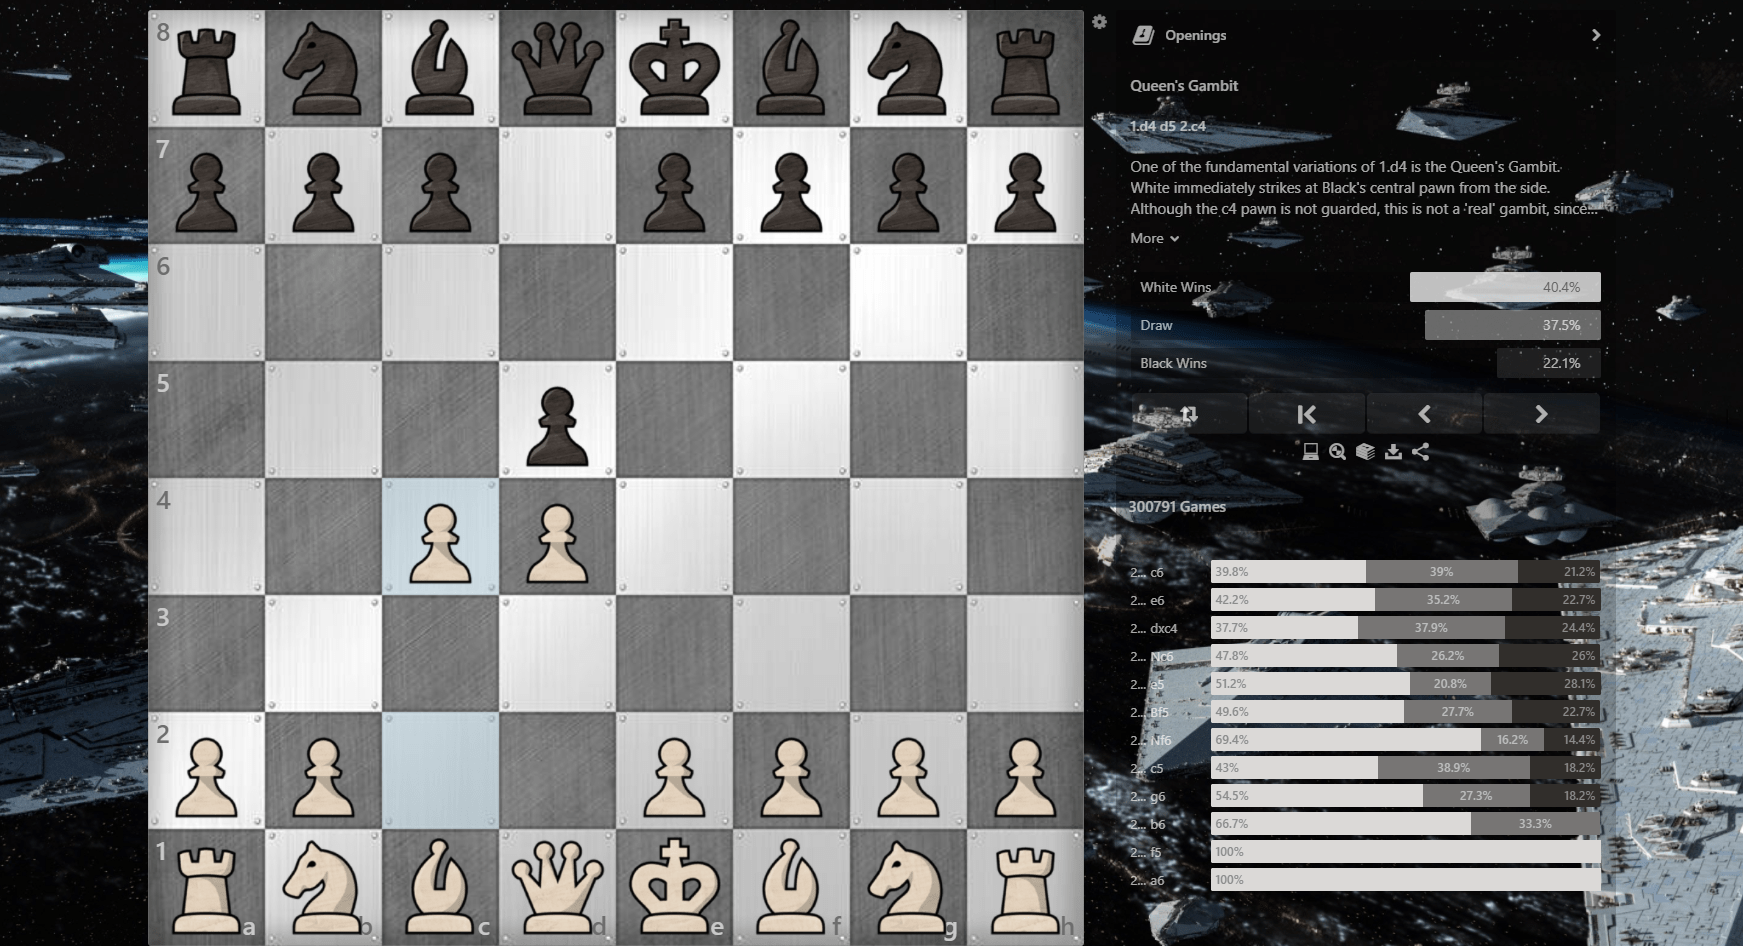 The Queens Gambit Explained - Chess.com